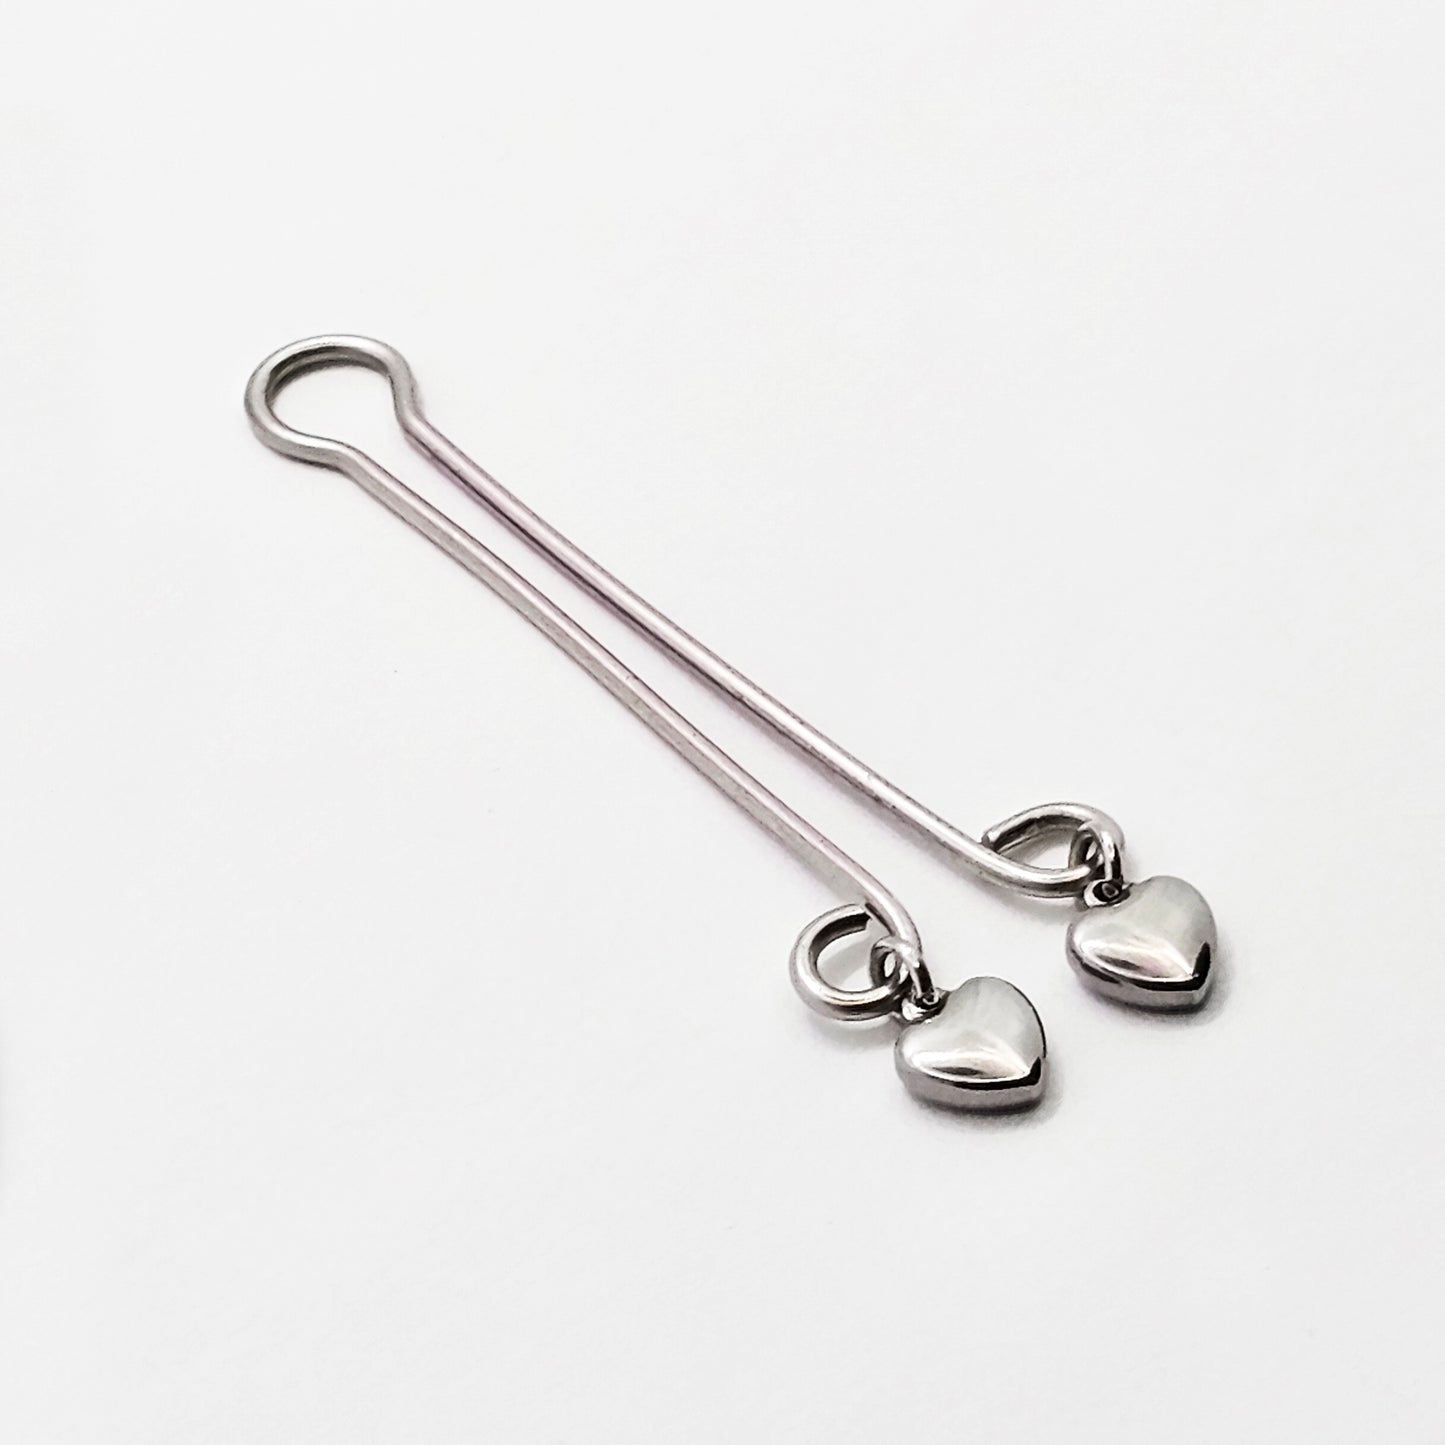 Labia Clip with Hearts, Stainless Steel. Non Piercing Clit Clip Vaginal Jewelry.